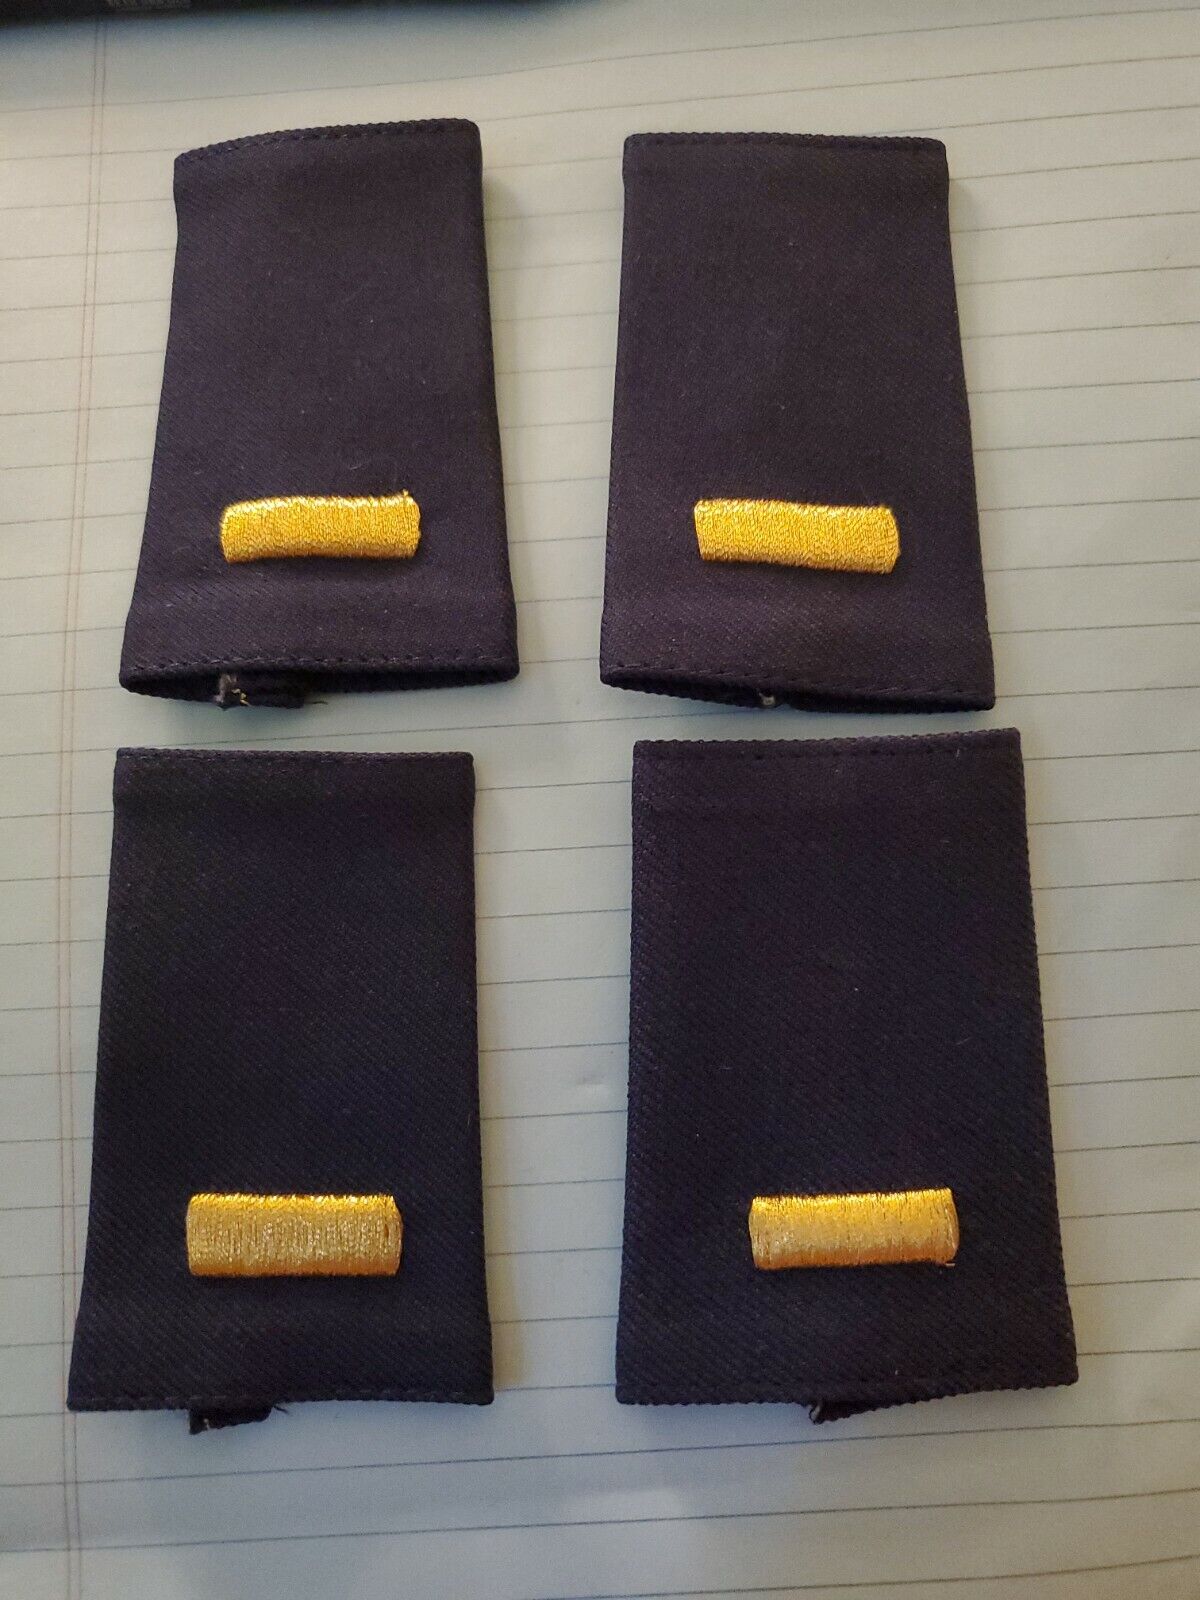 2 Pair US Air Force Shoulder Marks Epaulets 2nd Lieutenant Small Size Blue Gold